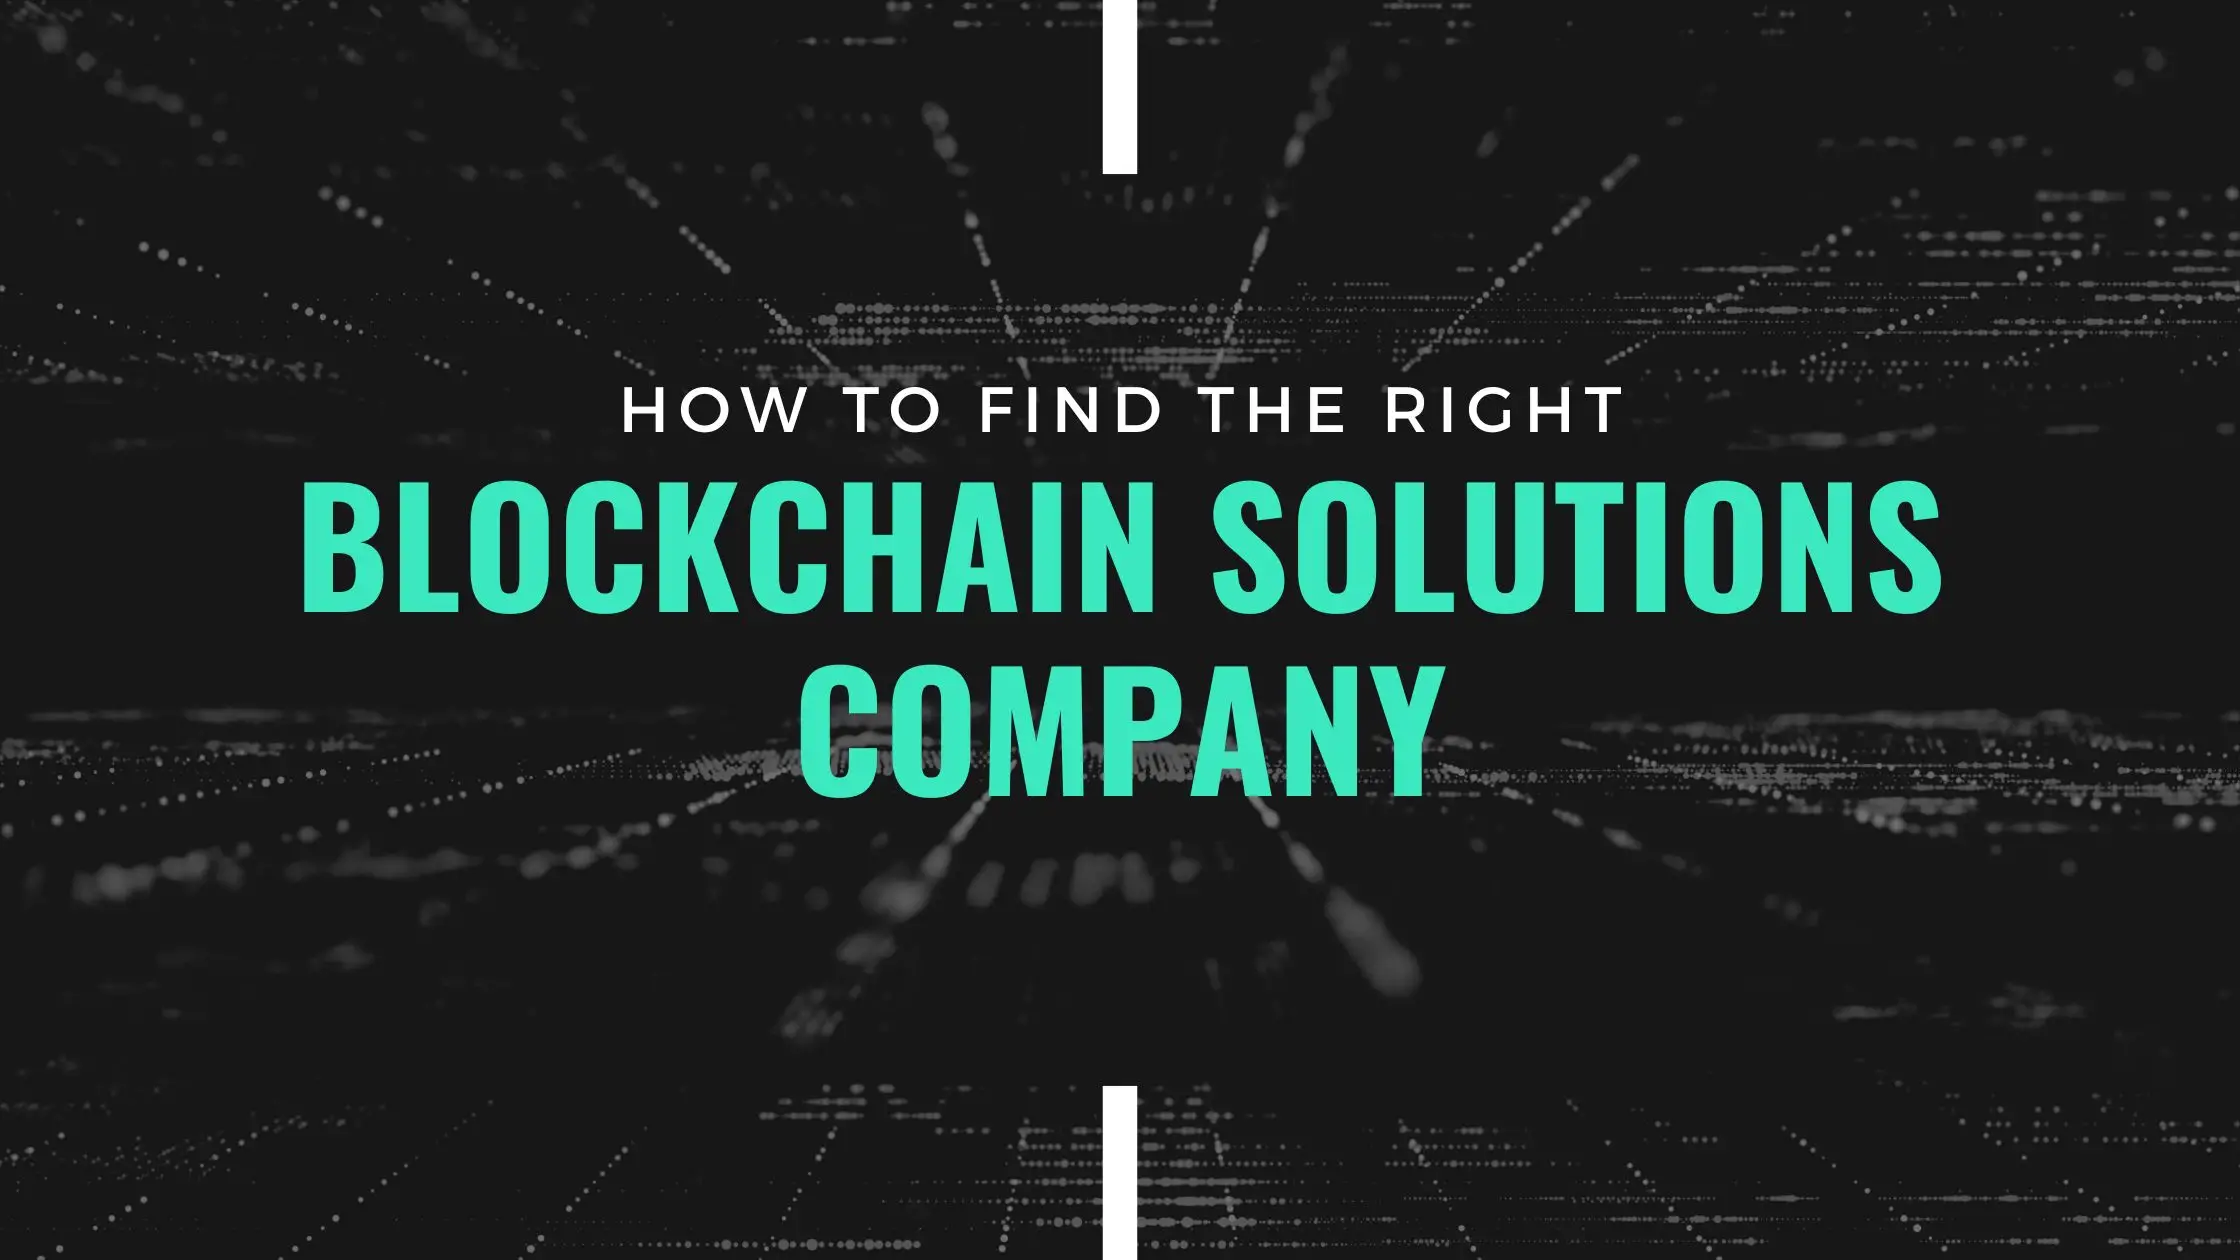 How to find the right blockchain solutions company